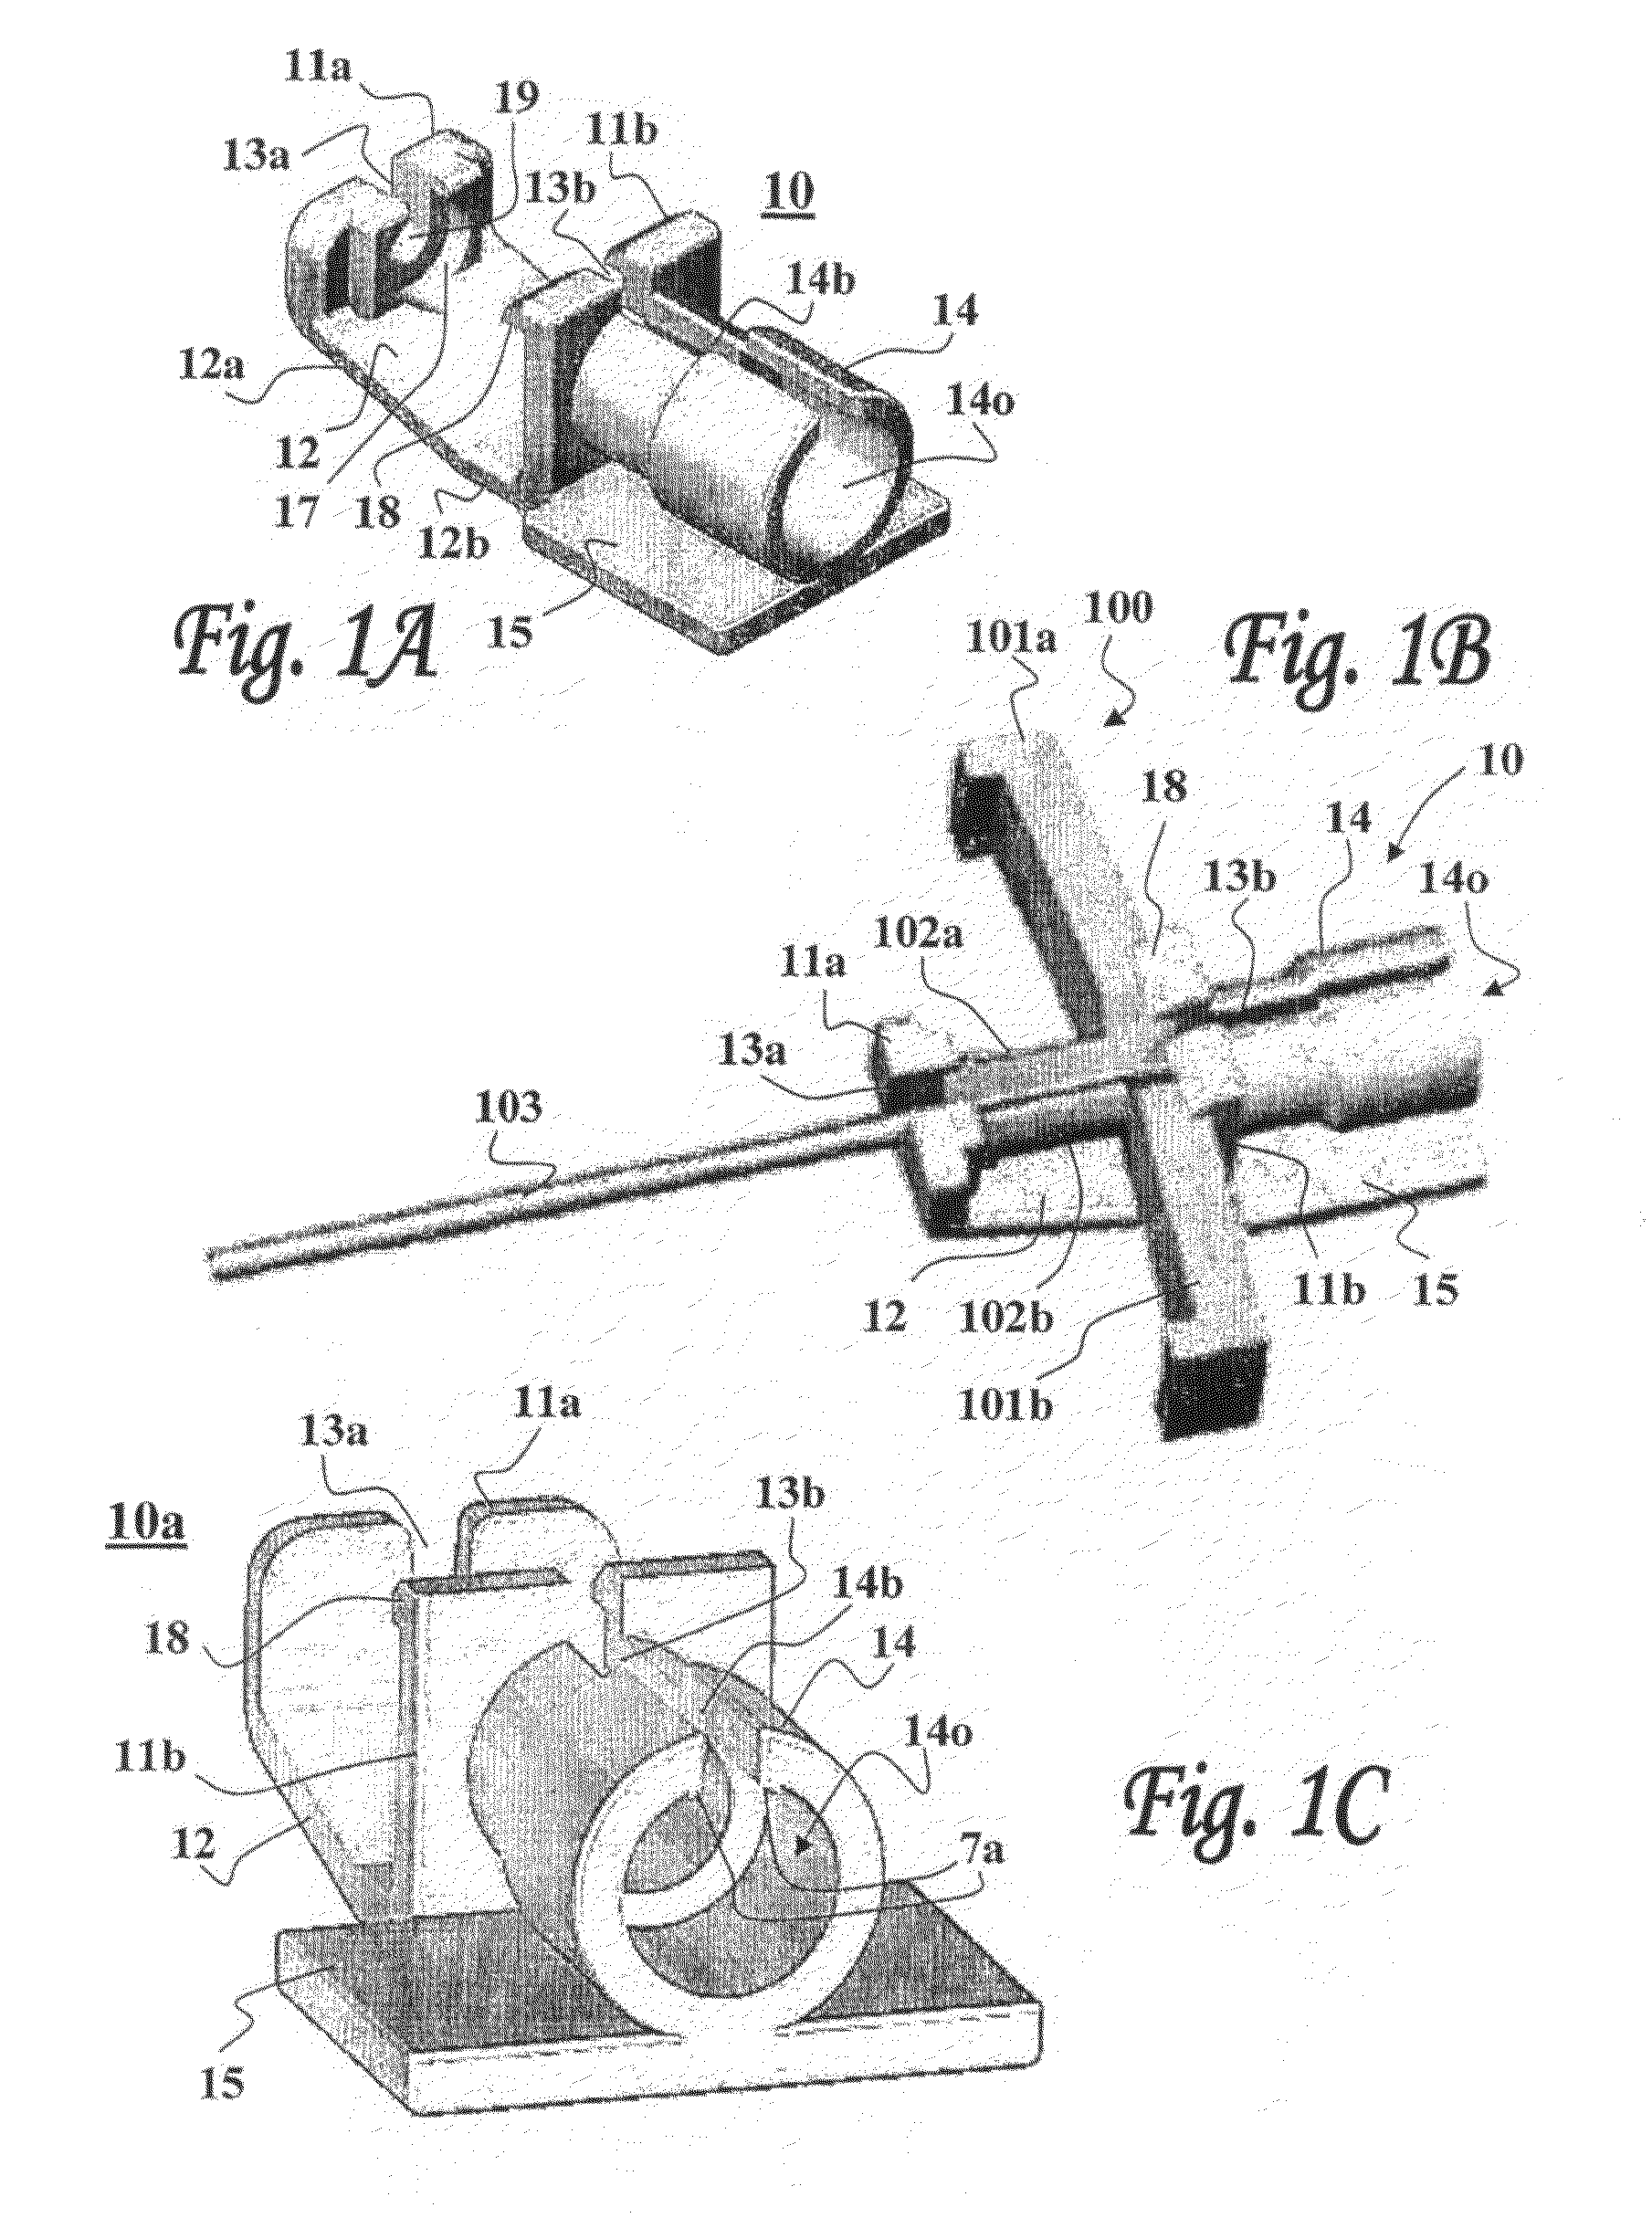 Removable adapter for a splittable introducer and method of use thereof